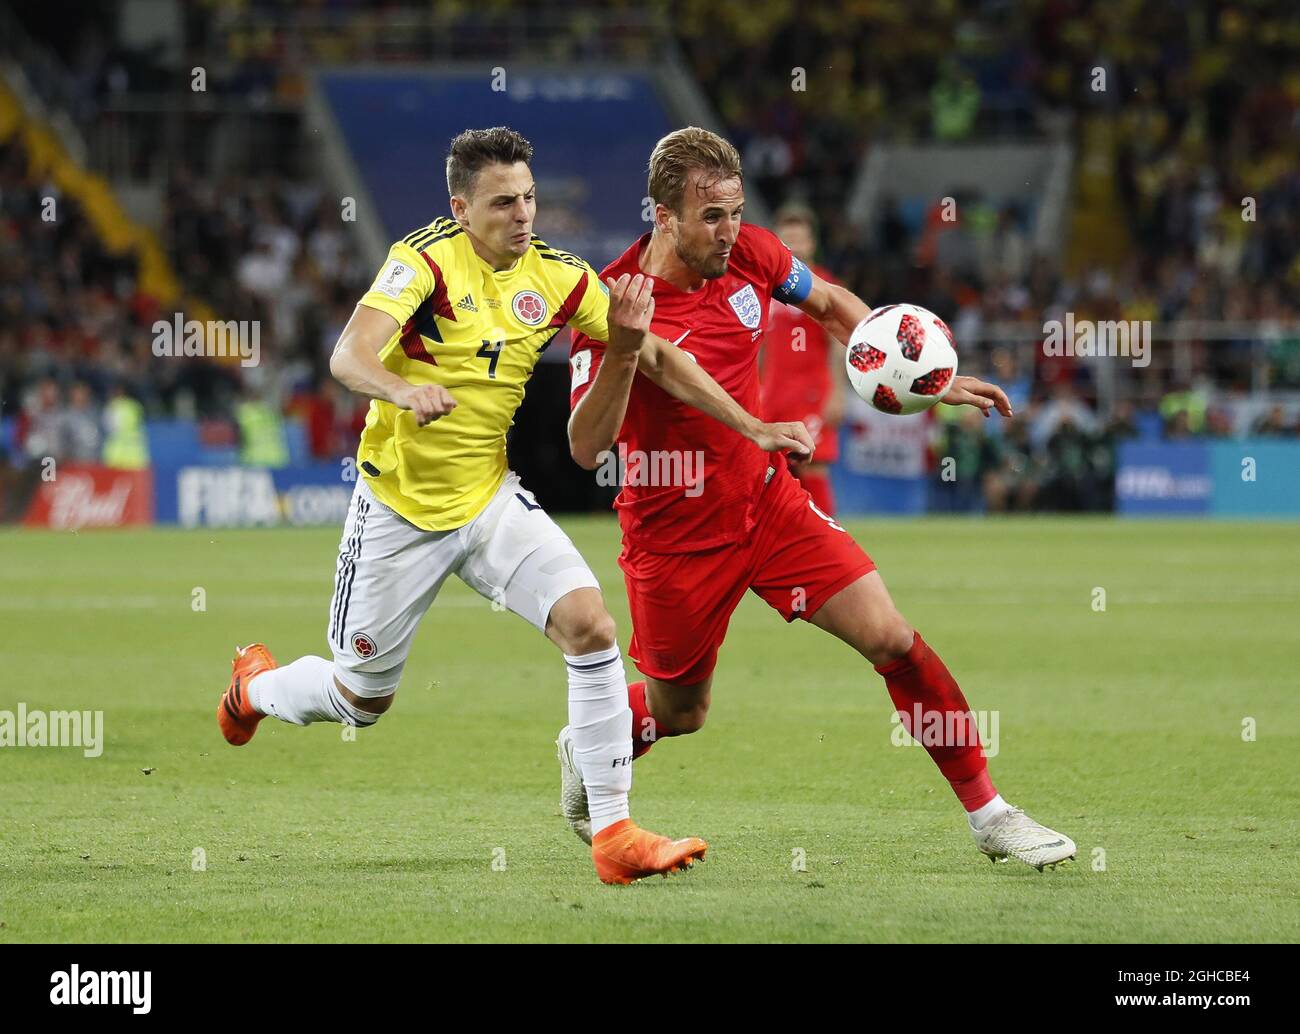 Santiago Arias of Colombia challenges Harry Kane of England during the FIFA World Cup 2018 Round of 16 match at the Spartak Stadium, Moscow. Picture date 3rd July 2018. Picture credit should read: David Klein/Sportimage via PA Images Stock Photo